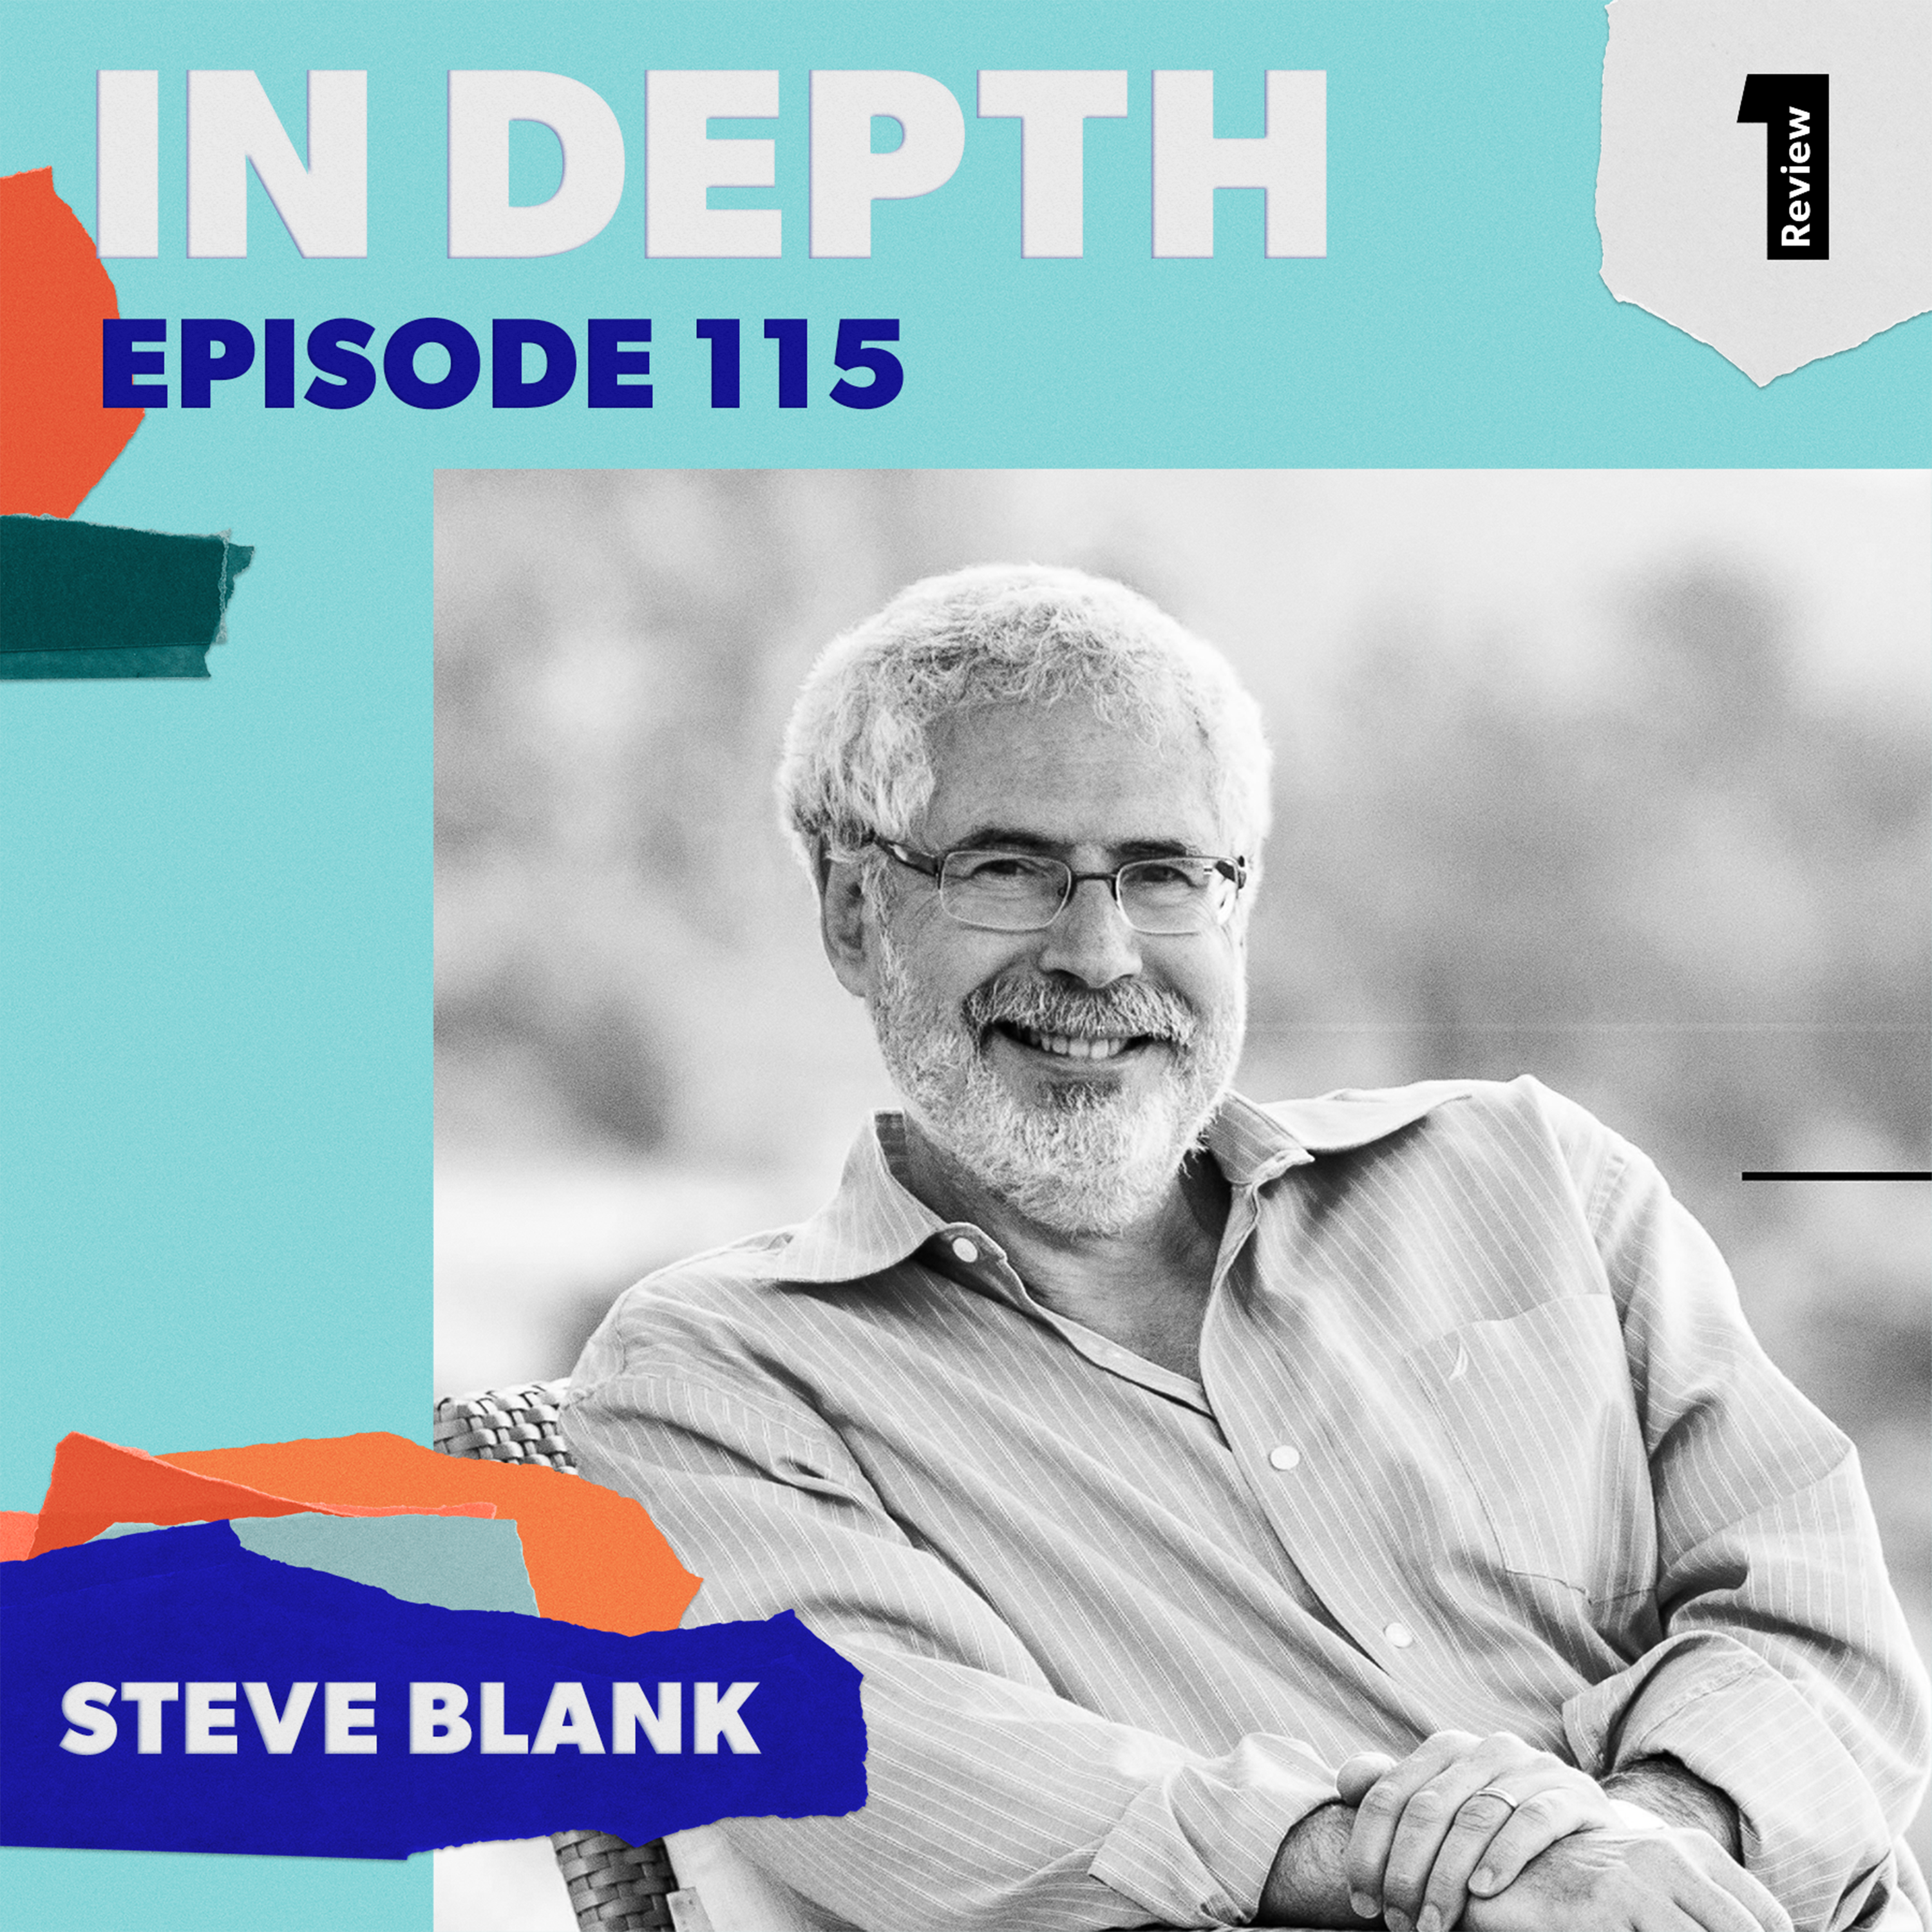 Mastering modern entrepreneurship | Building lean, starting young, and studying customers | Steve Blank (Author of The Four Steps to the Epiphany)